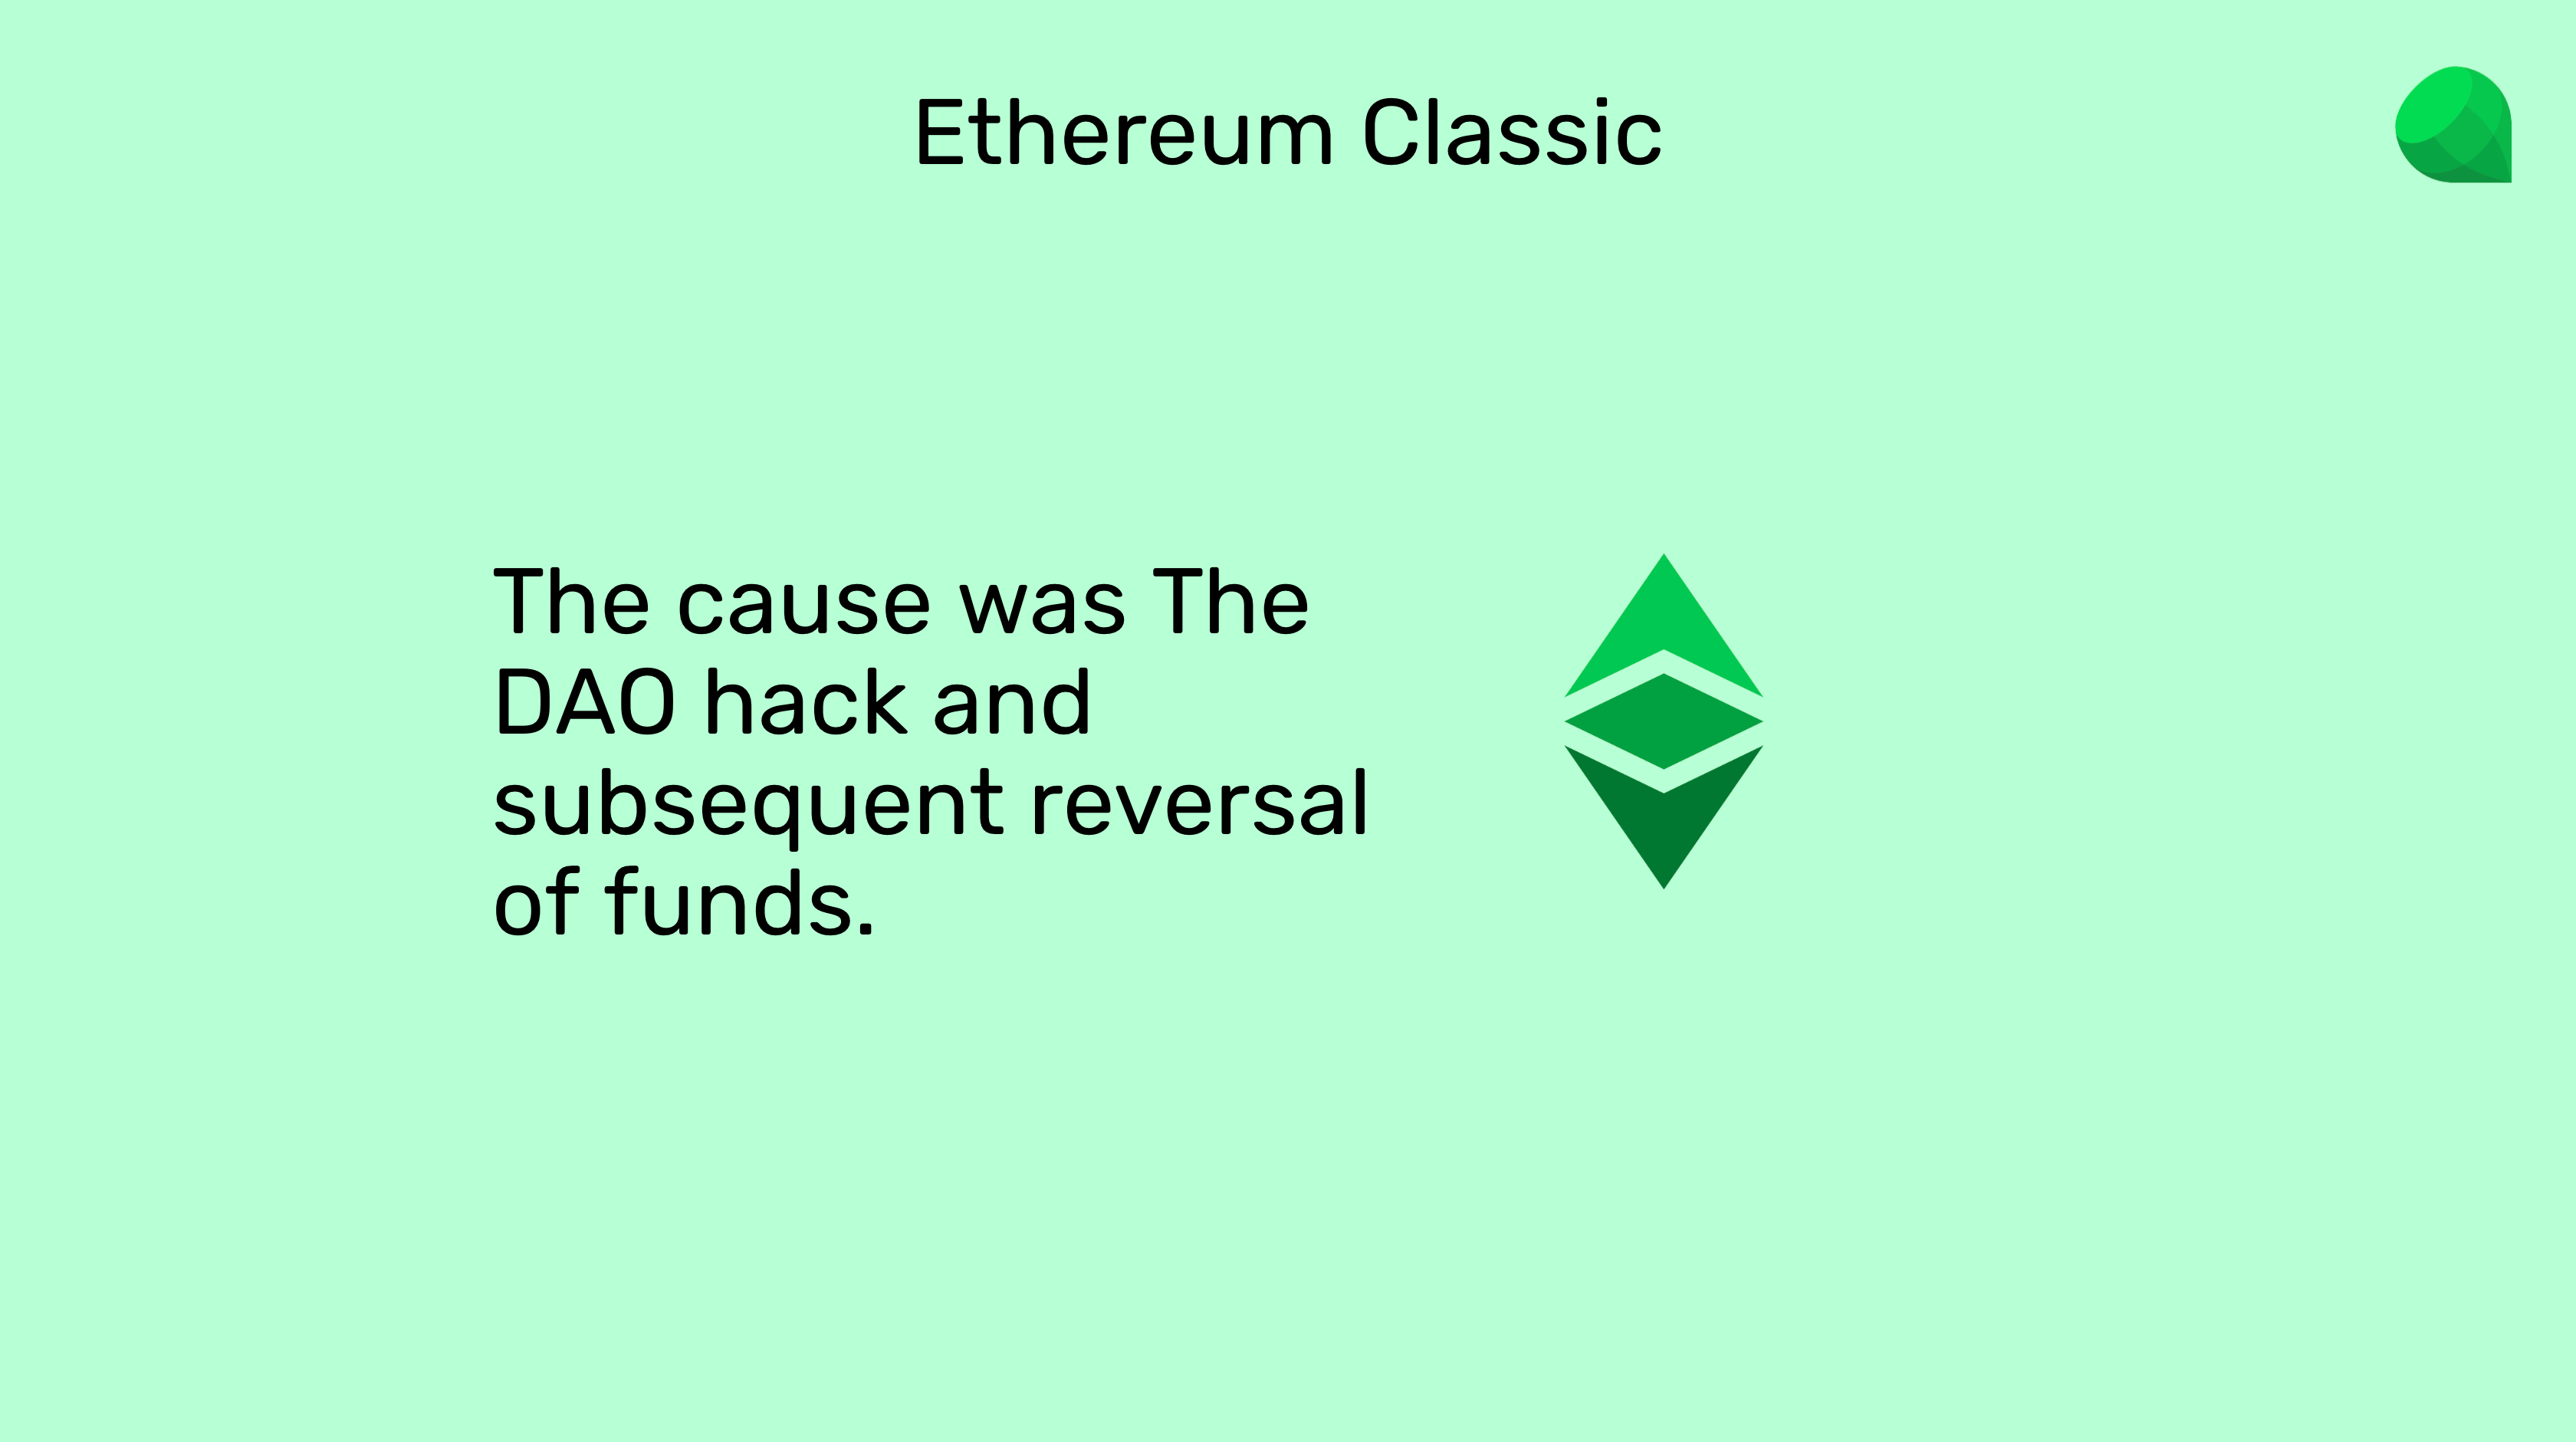 The DAO hack caused the split.